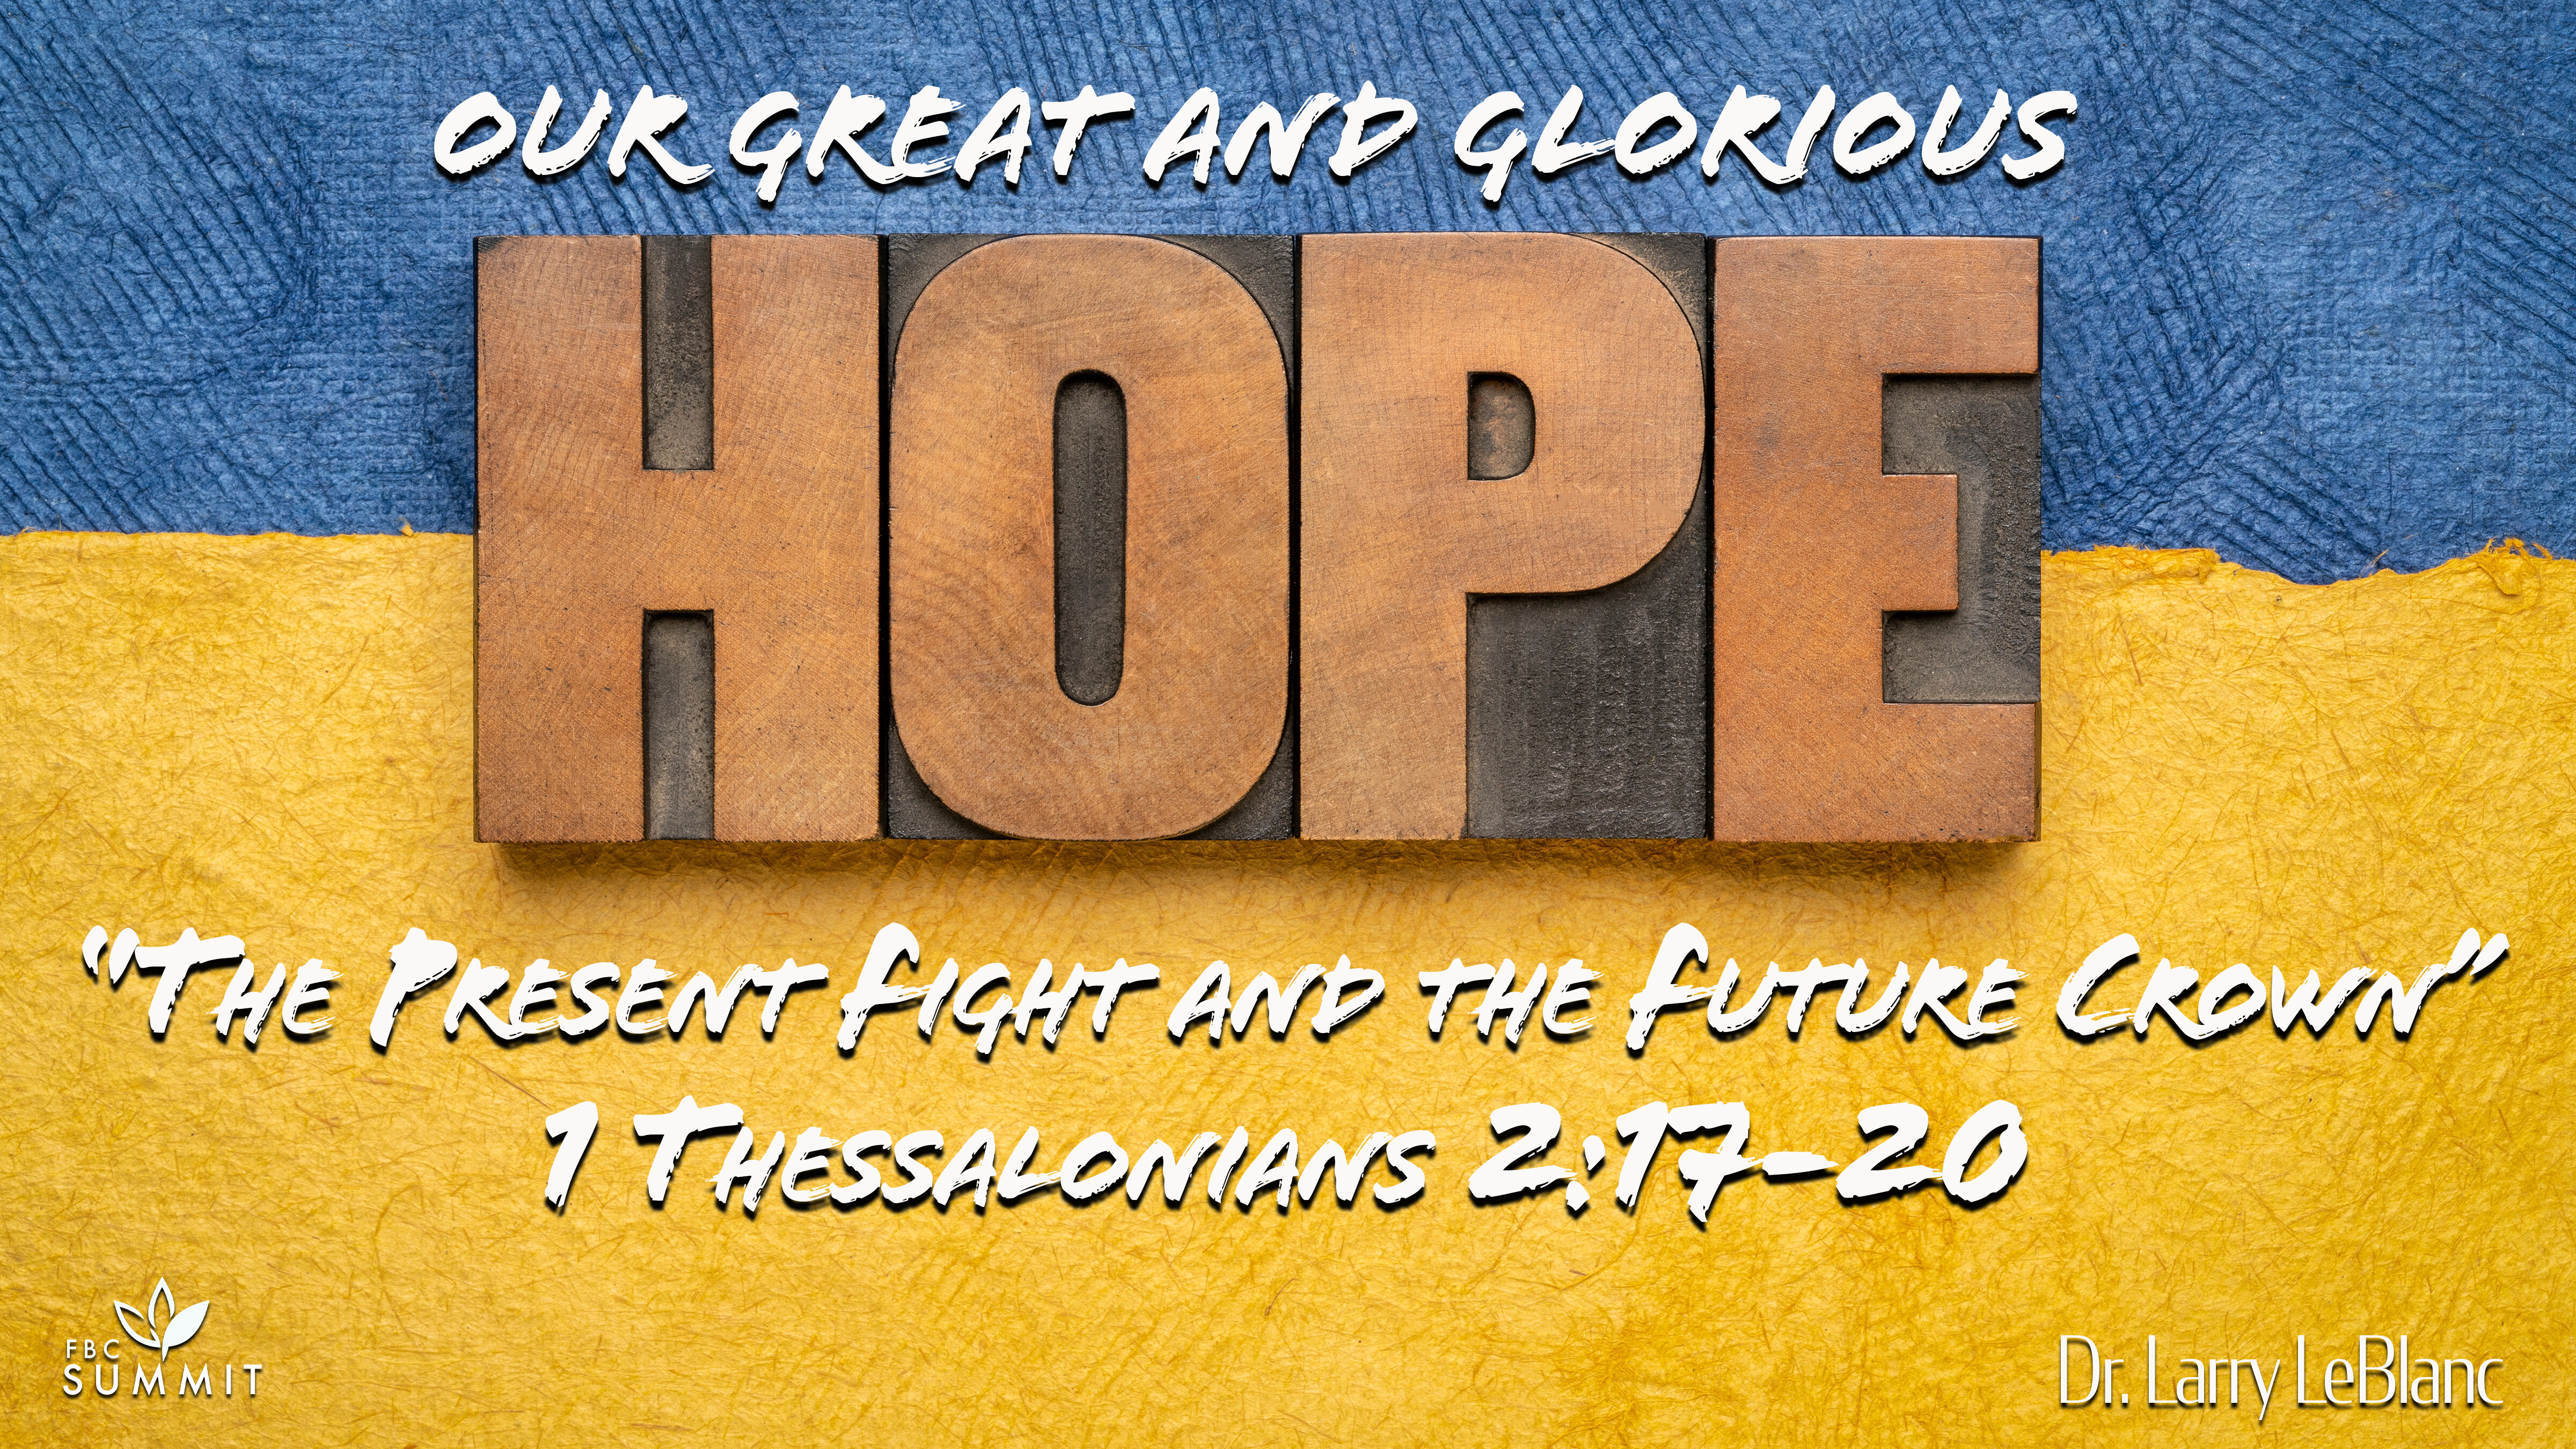 "The Present Fight & The Future Crown" 1 Thessalonians 2:17-20 // Dr. Larry LeBlanc